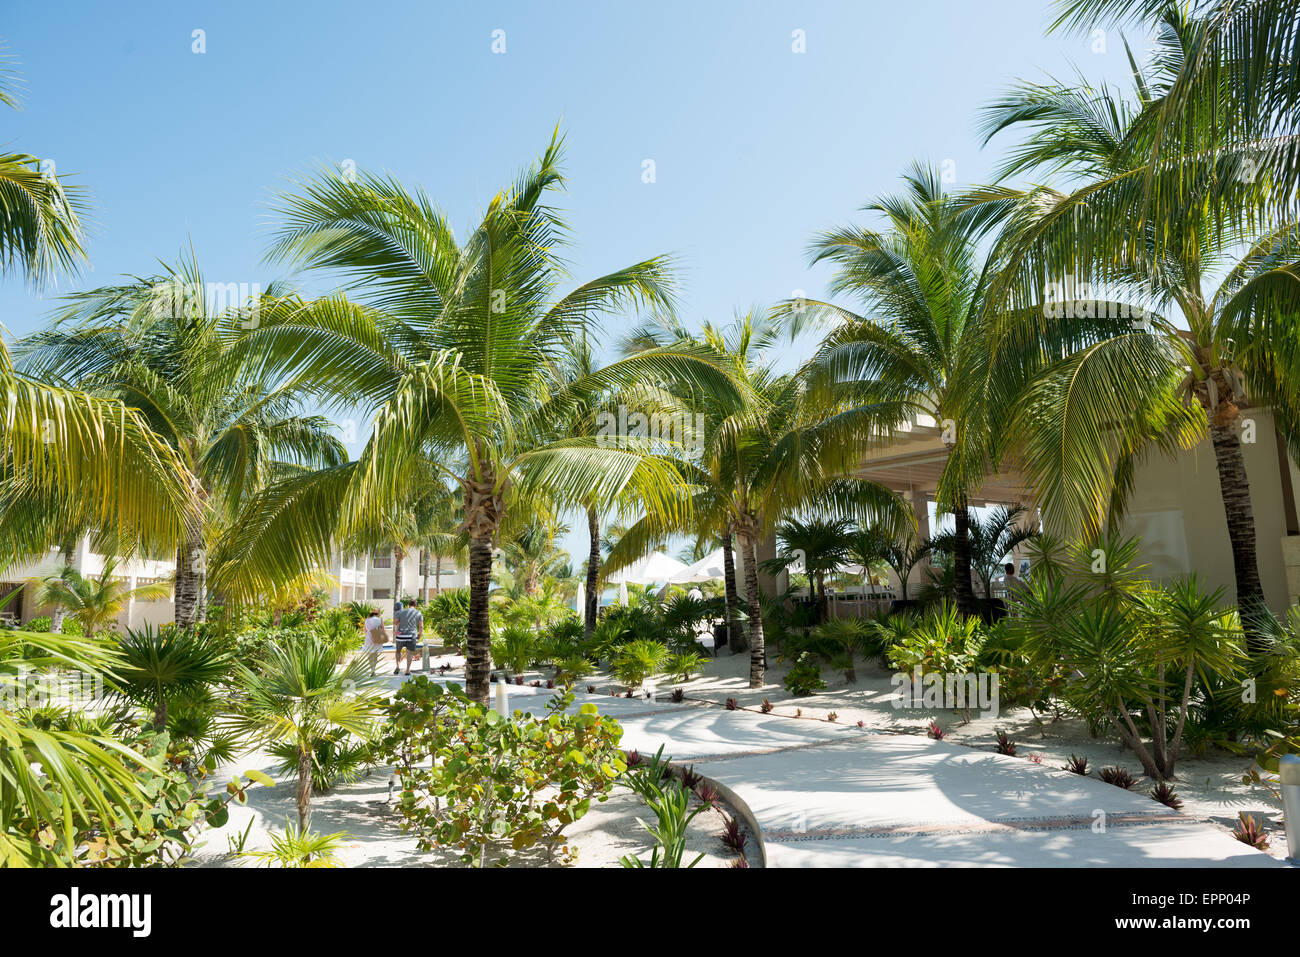 The Beloved Hotel, Playa Mujeres, Mexico, is located just north of Cancun. It's a luxury all-inclusive beach resort owned by the Excellence Group. Stock Photo